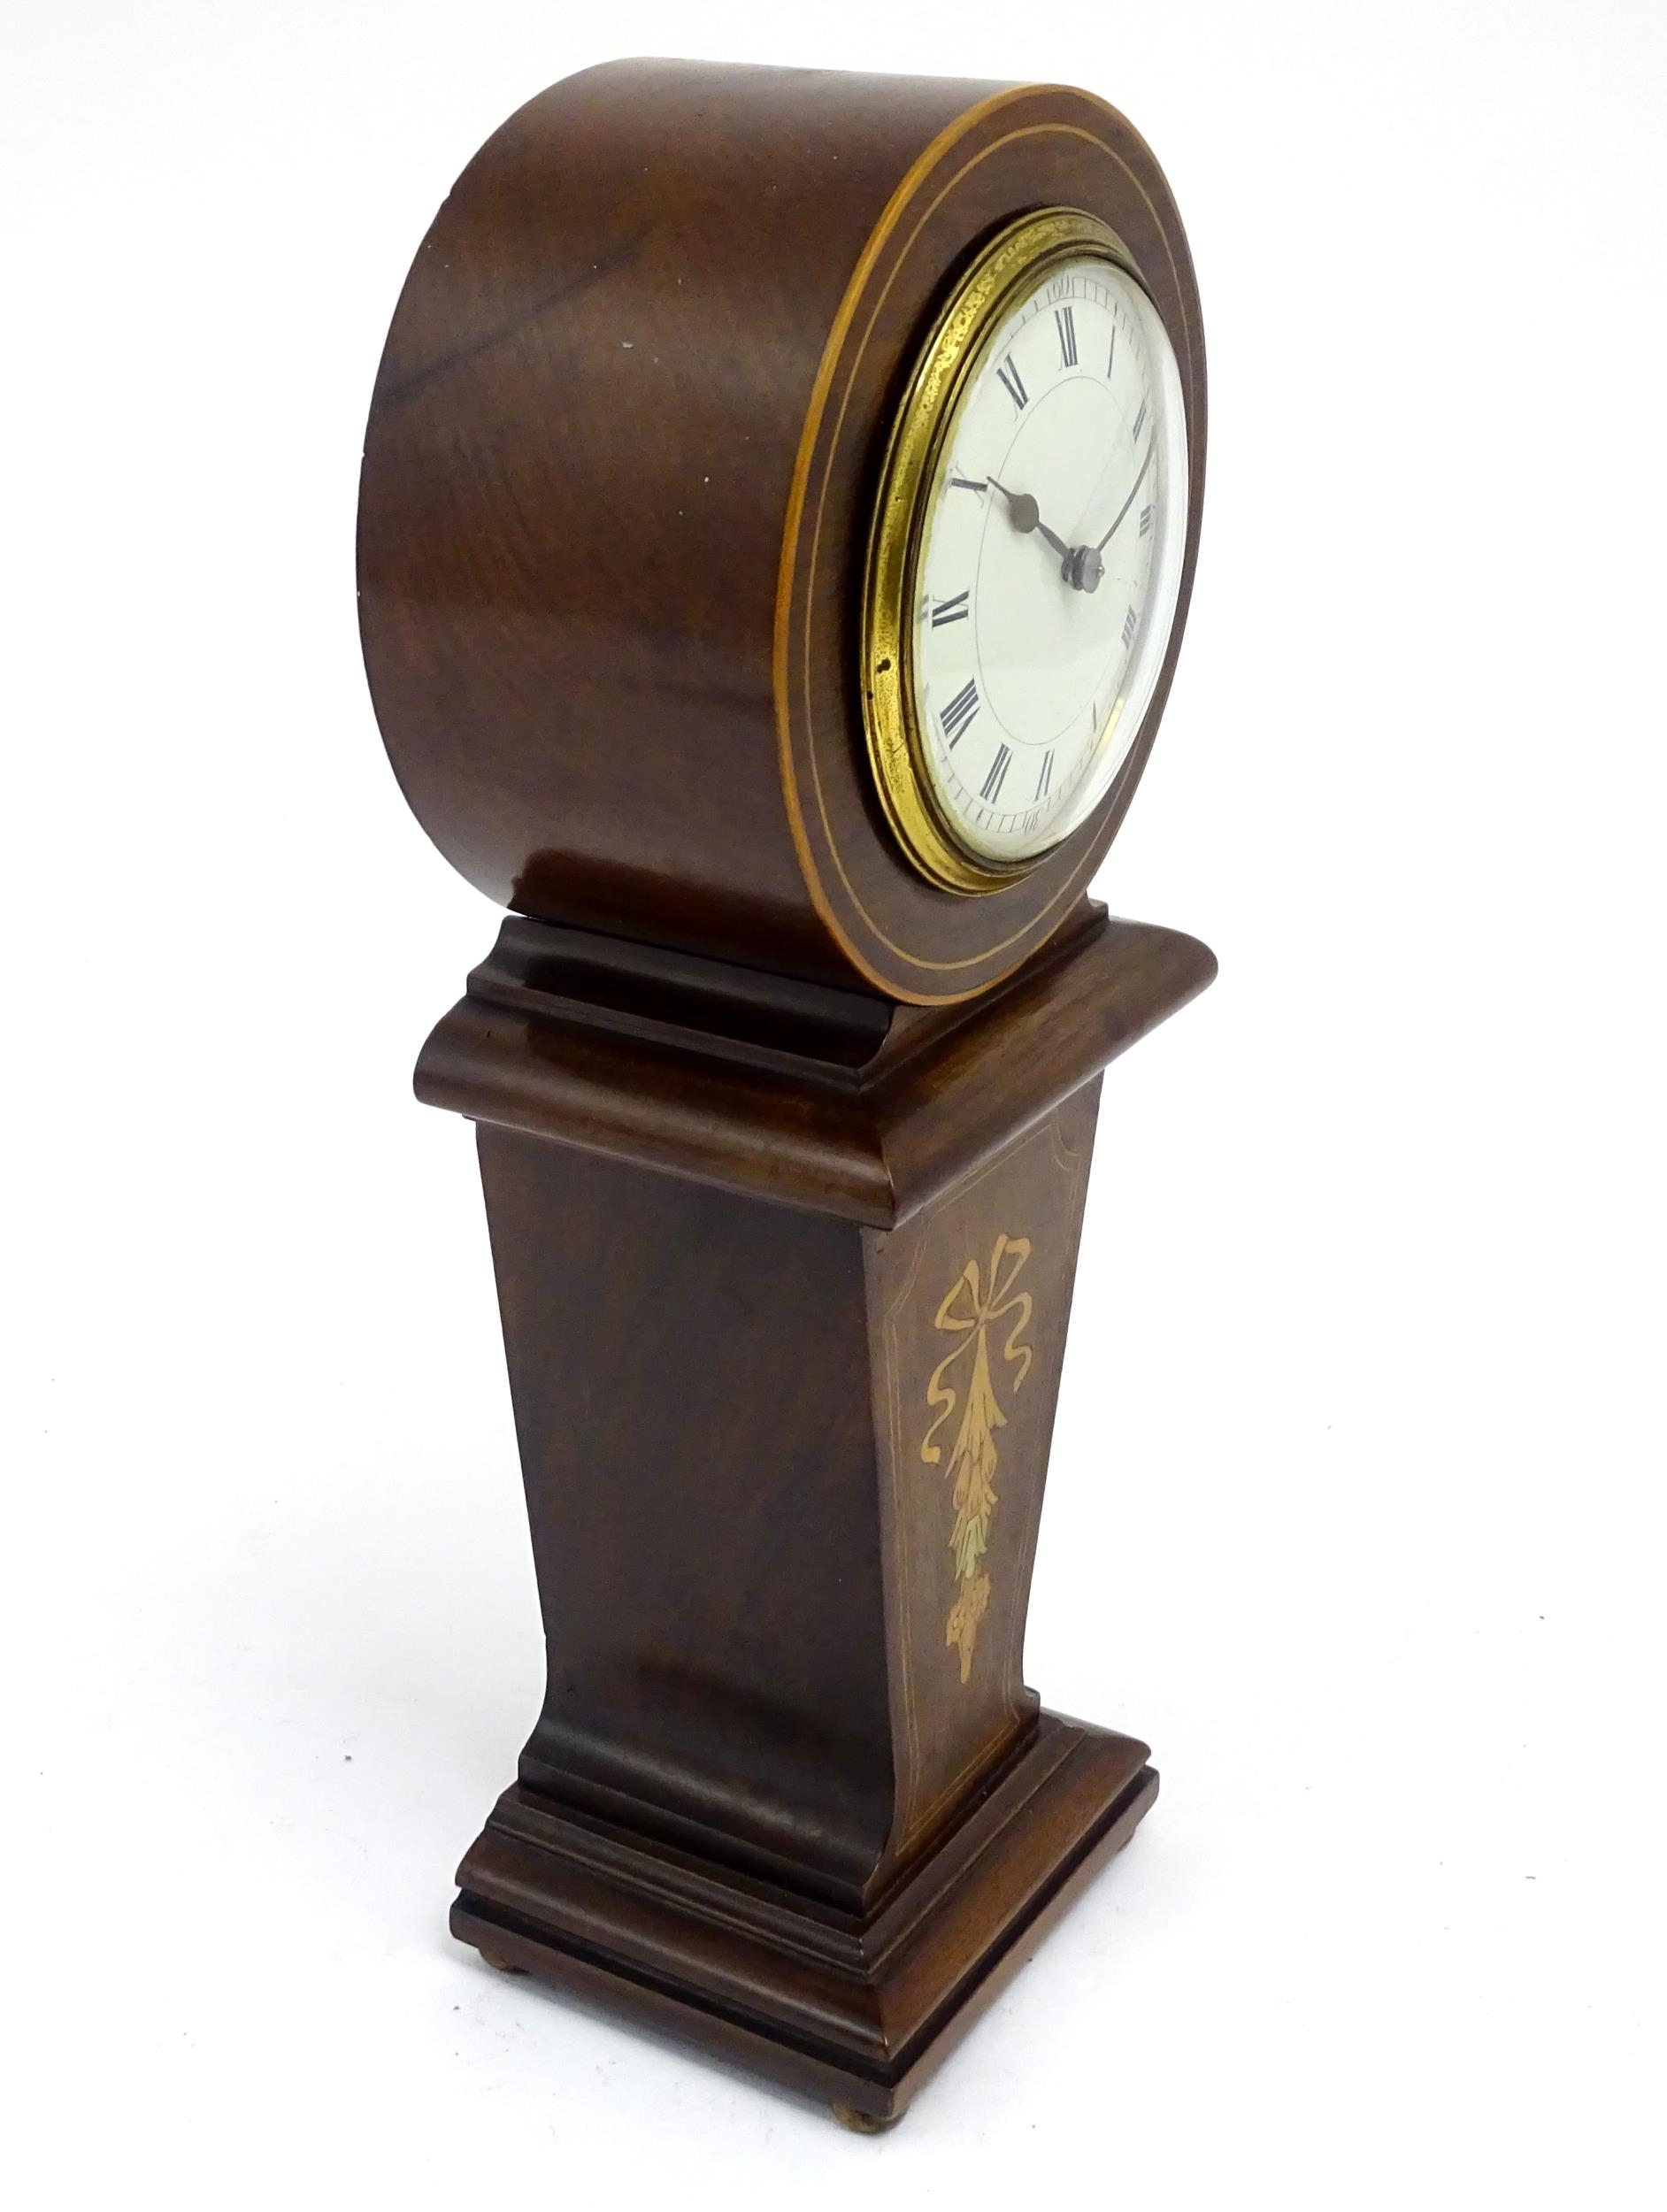 A mahogany mantle clock with inlaid detail and white enamel dial with movement by Duverdrey & - Image 3 of 9